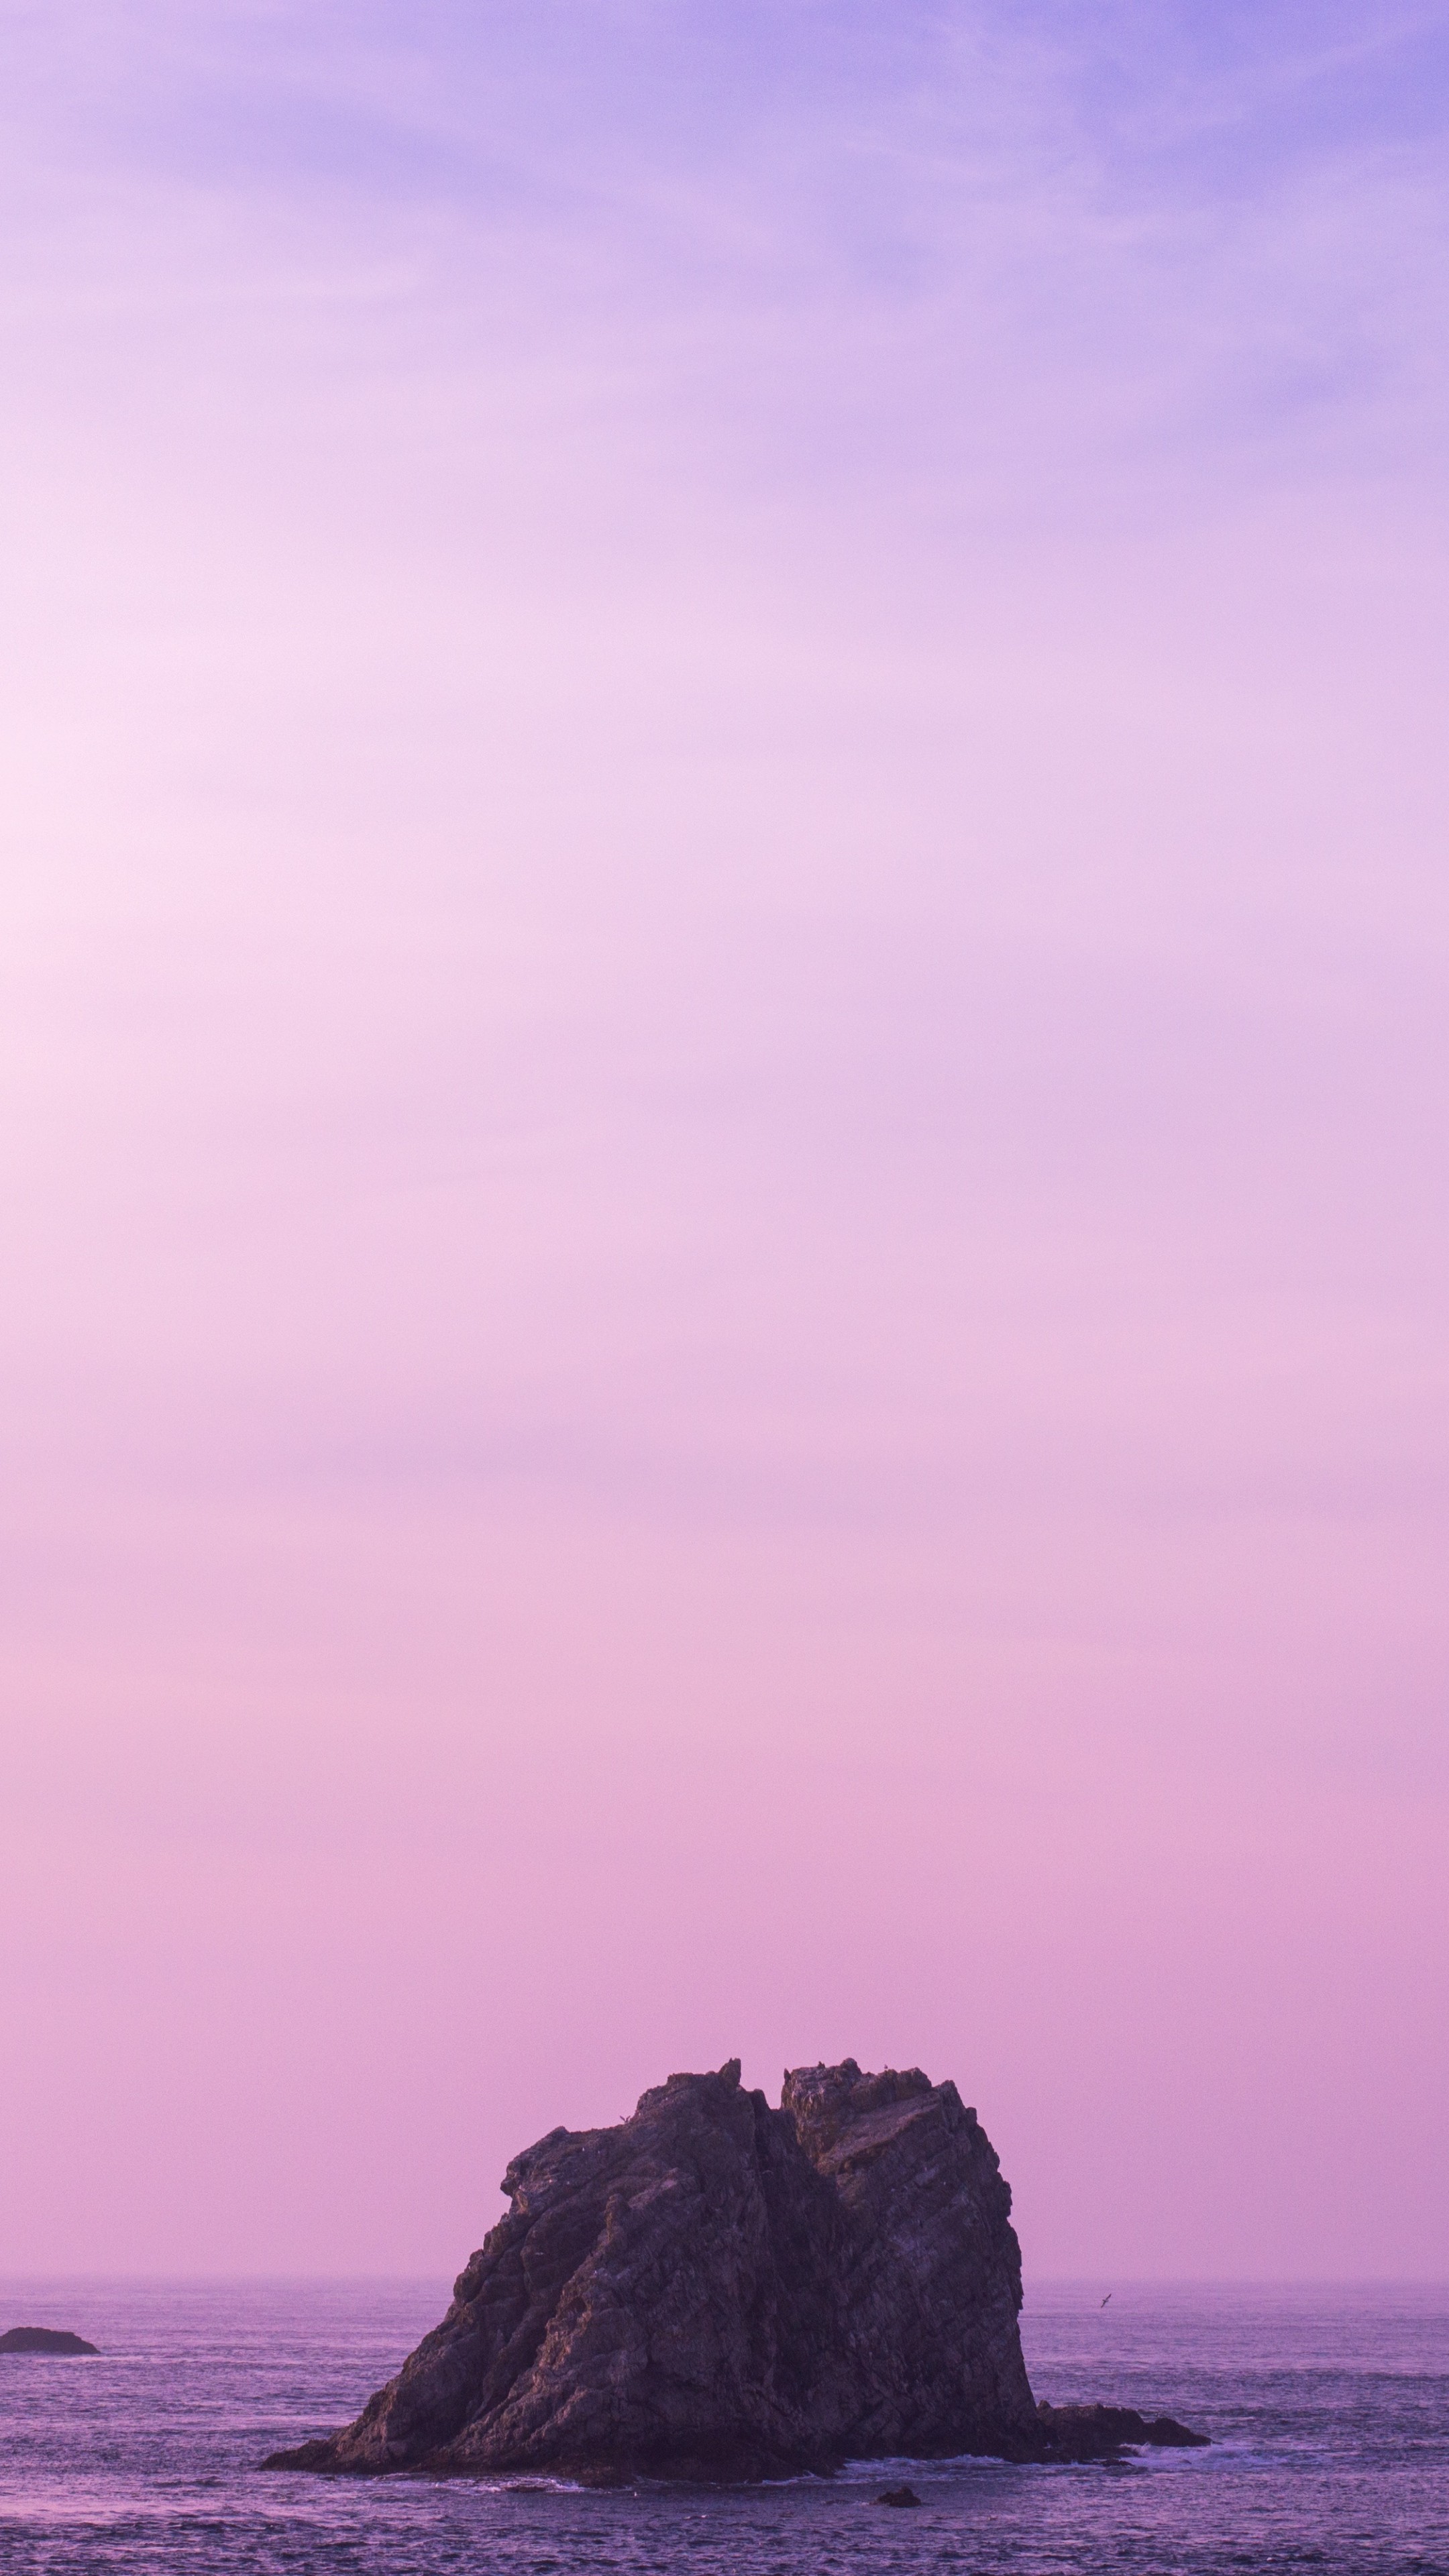 Wallpaper Desktop Lilac Images  Free Photos PNG Stickers Wallpapers   Backgrounds  rawpixel